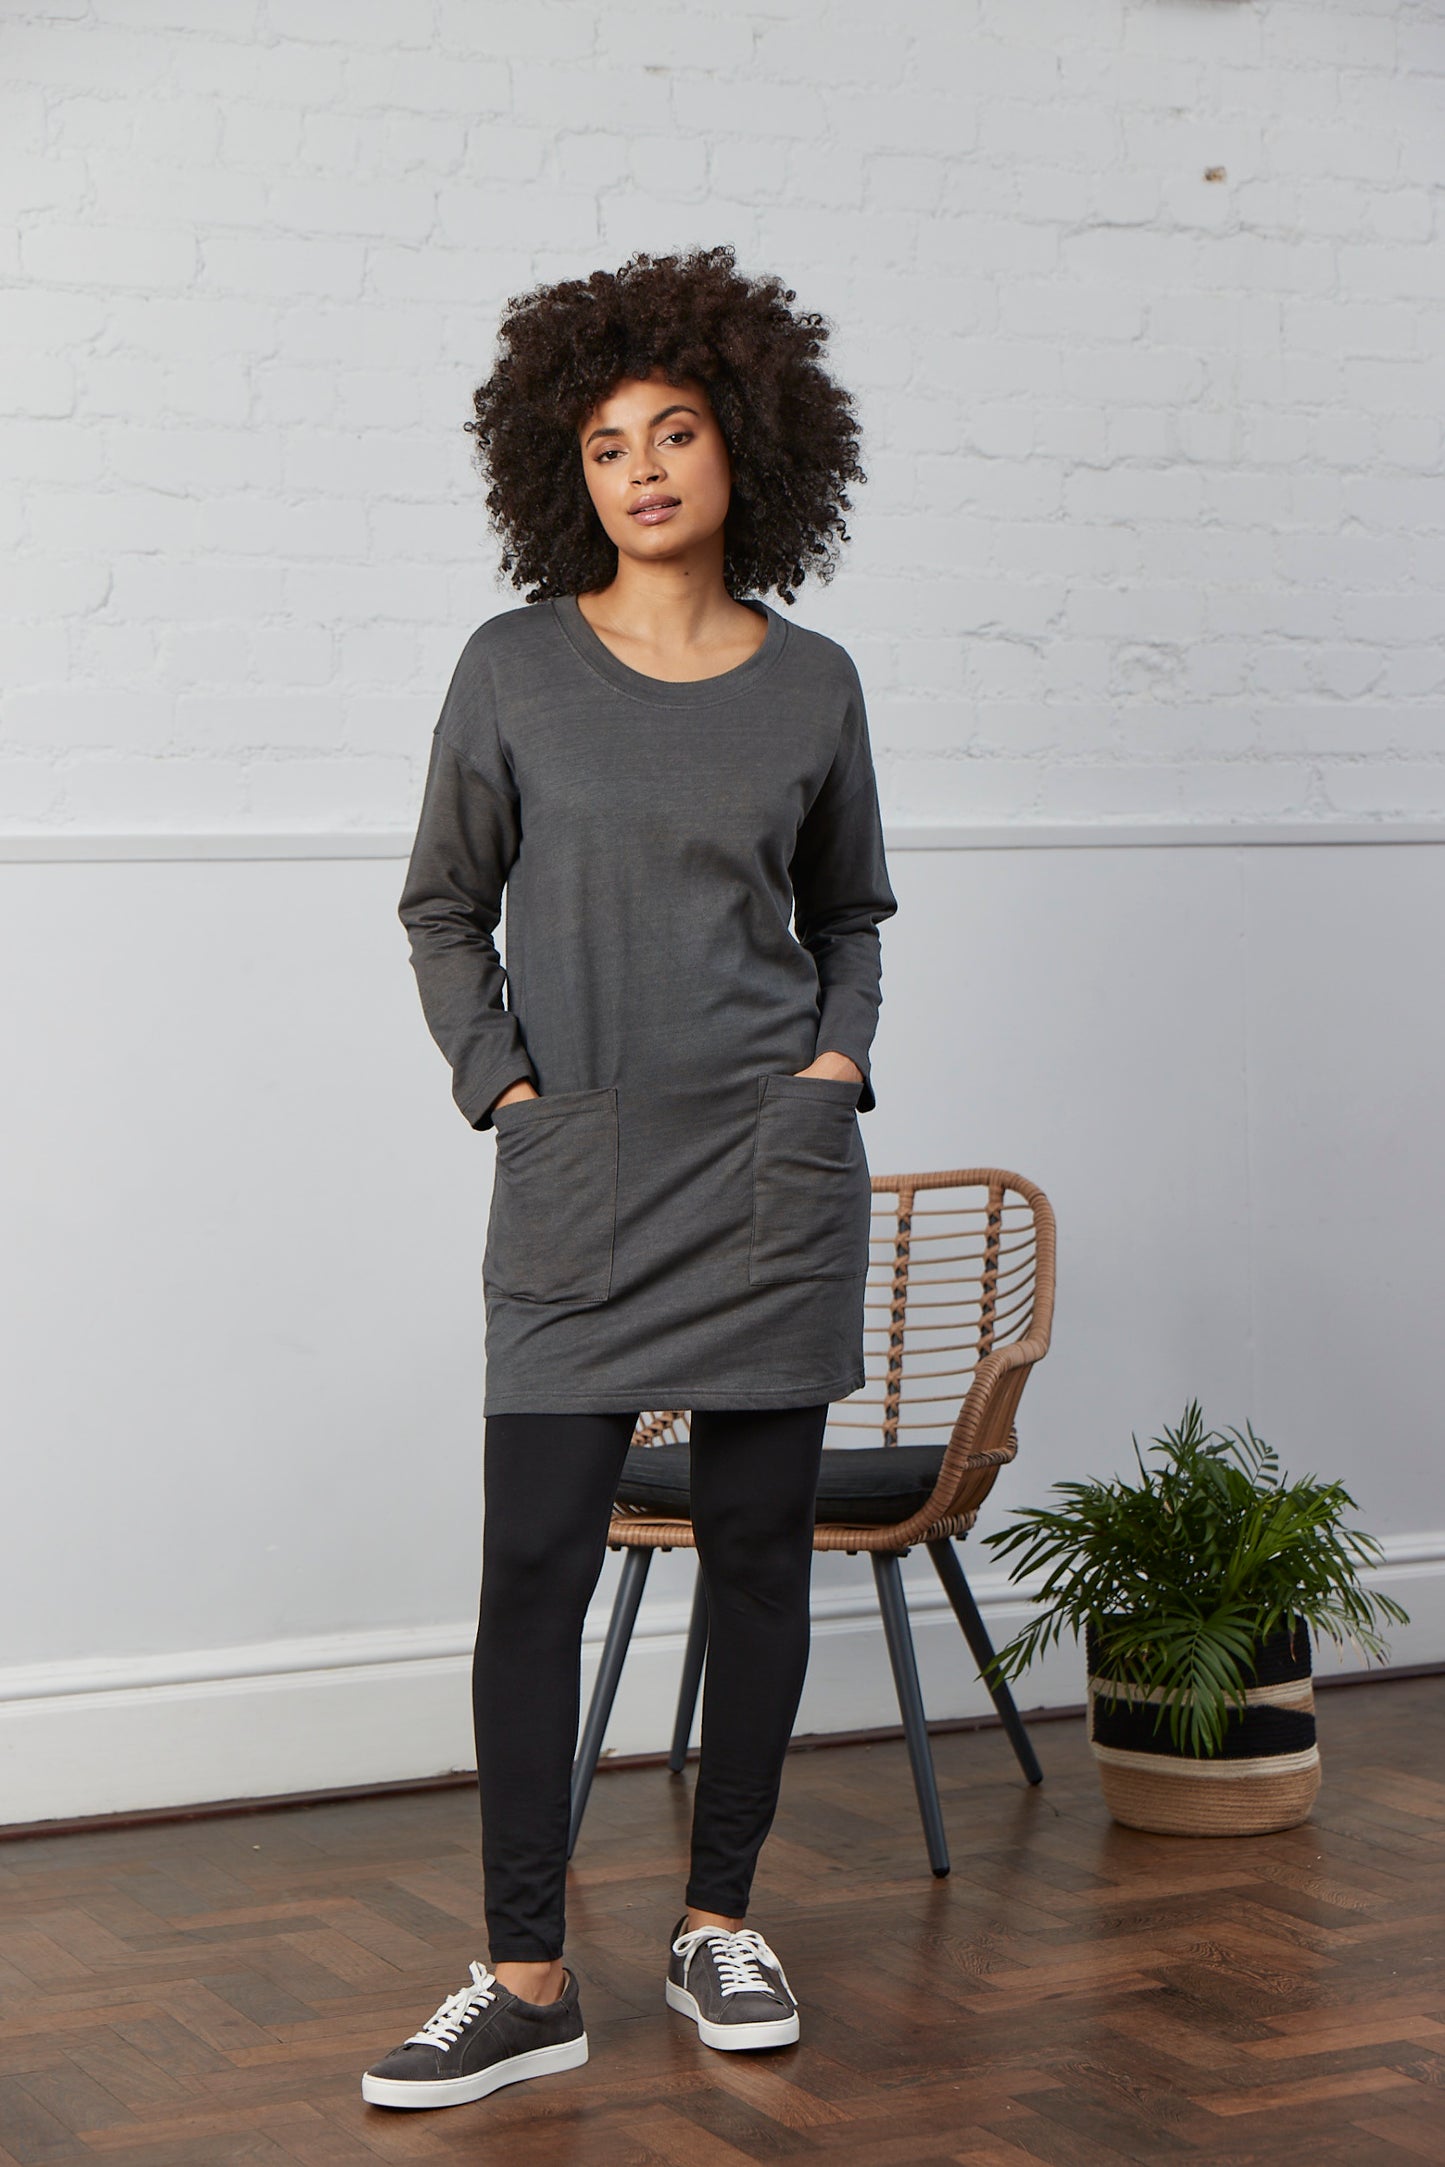 Nomads organic cotton marl tunic dress in seal - last one!